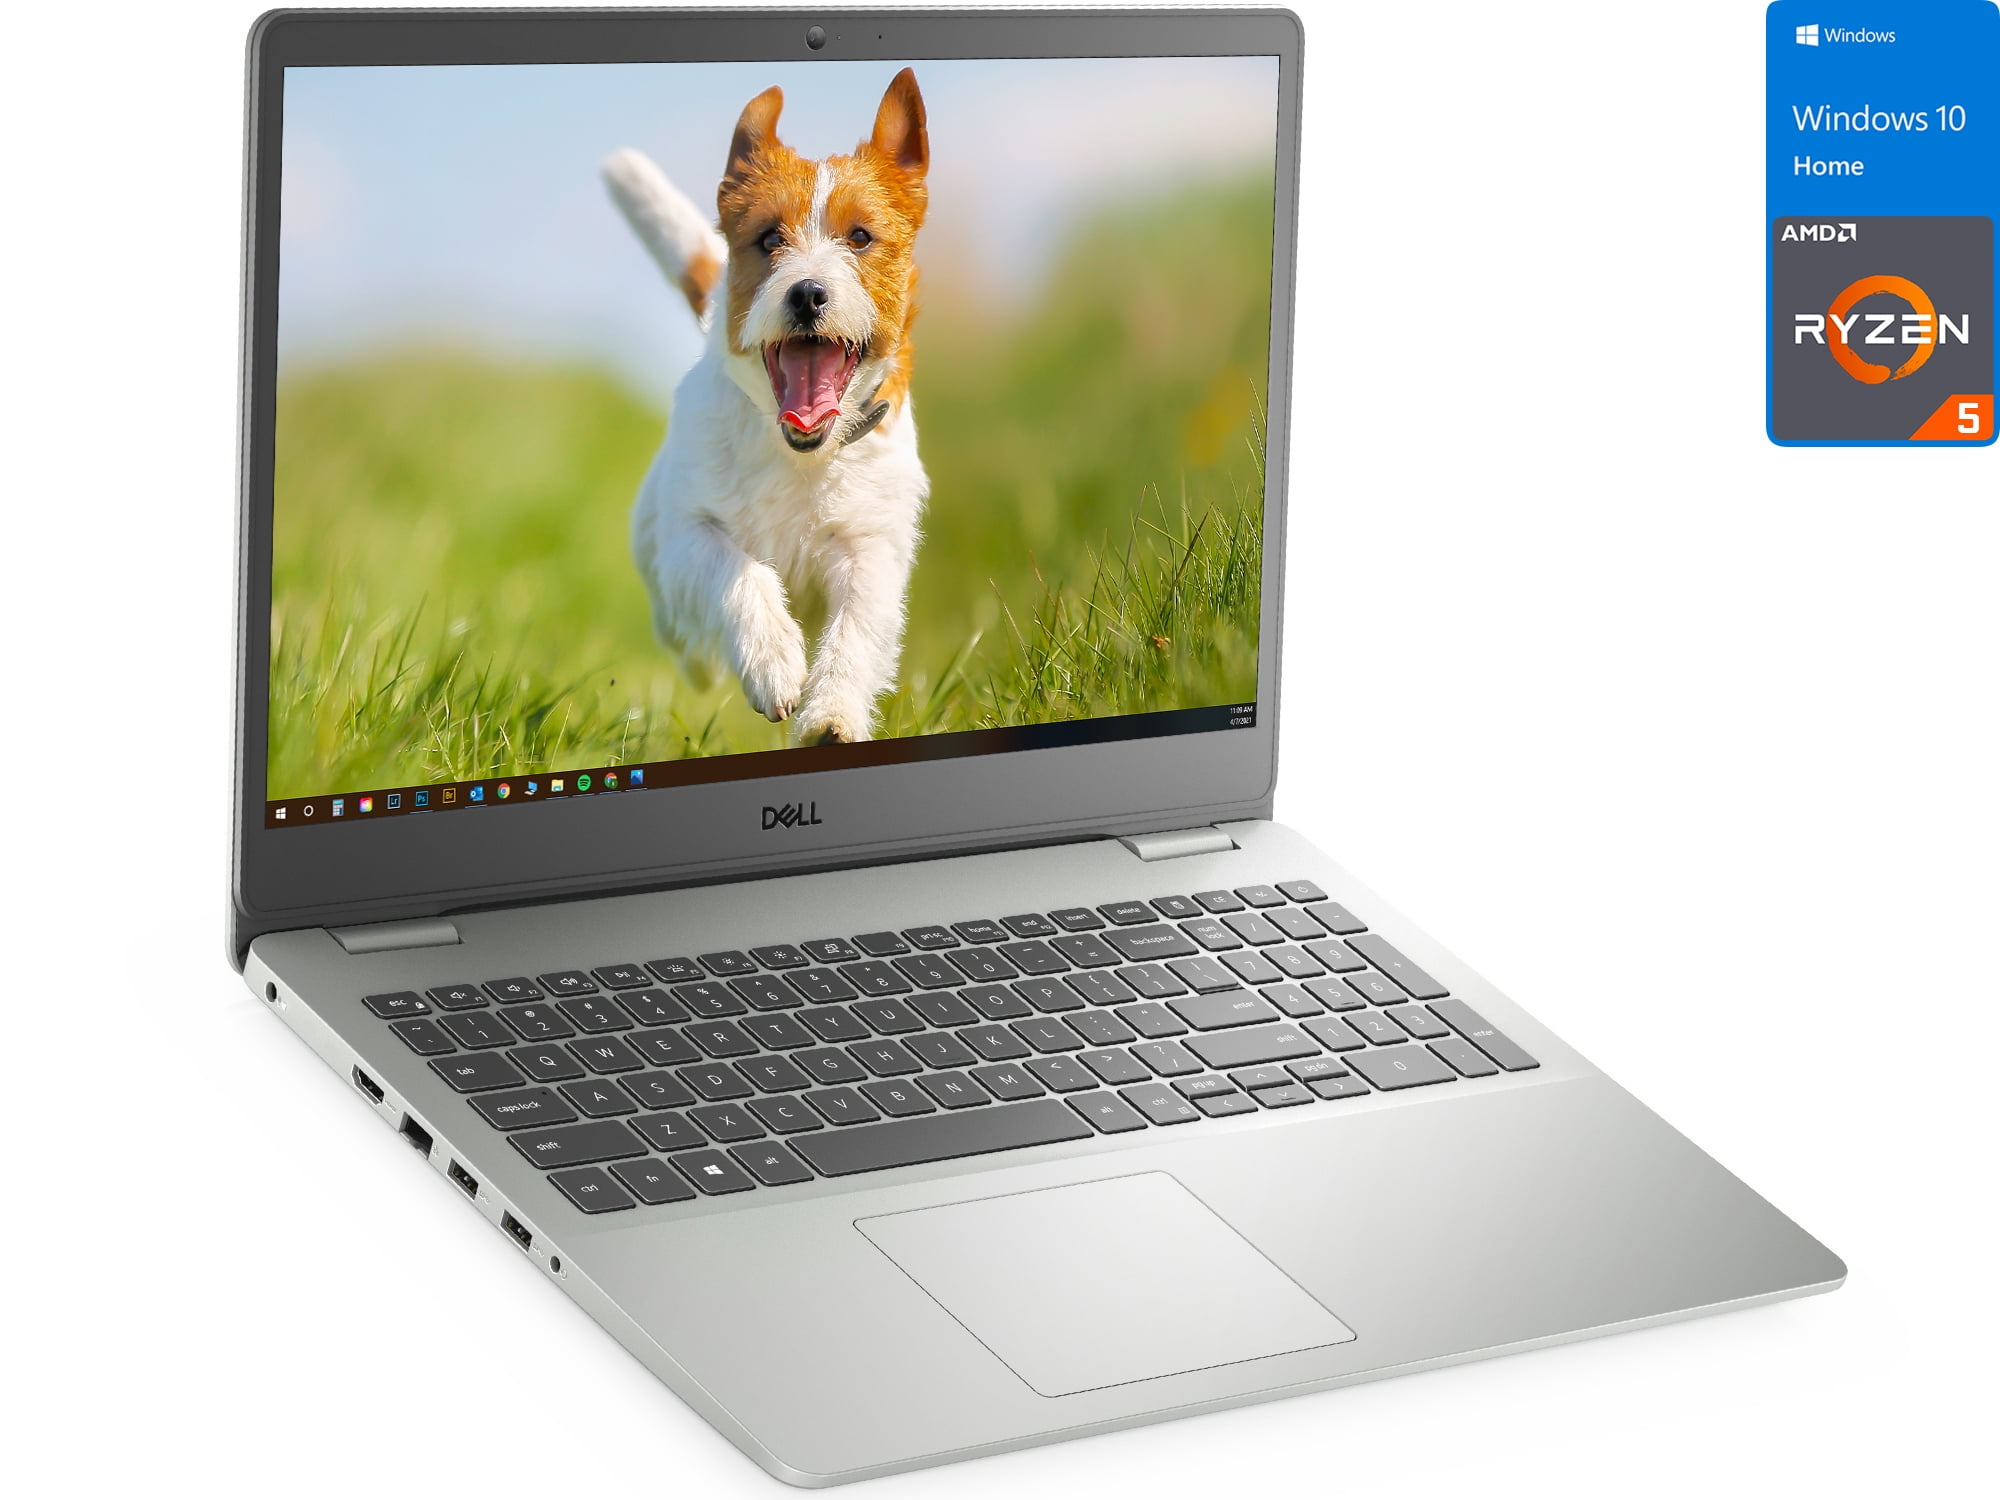 Dell Inspiron 3505 Notebook, 15.6